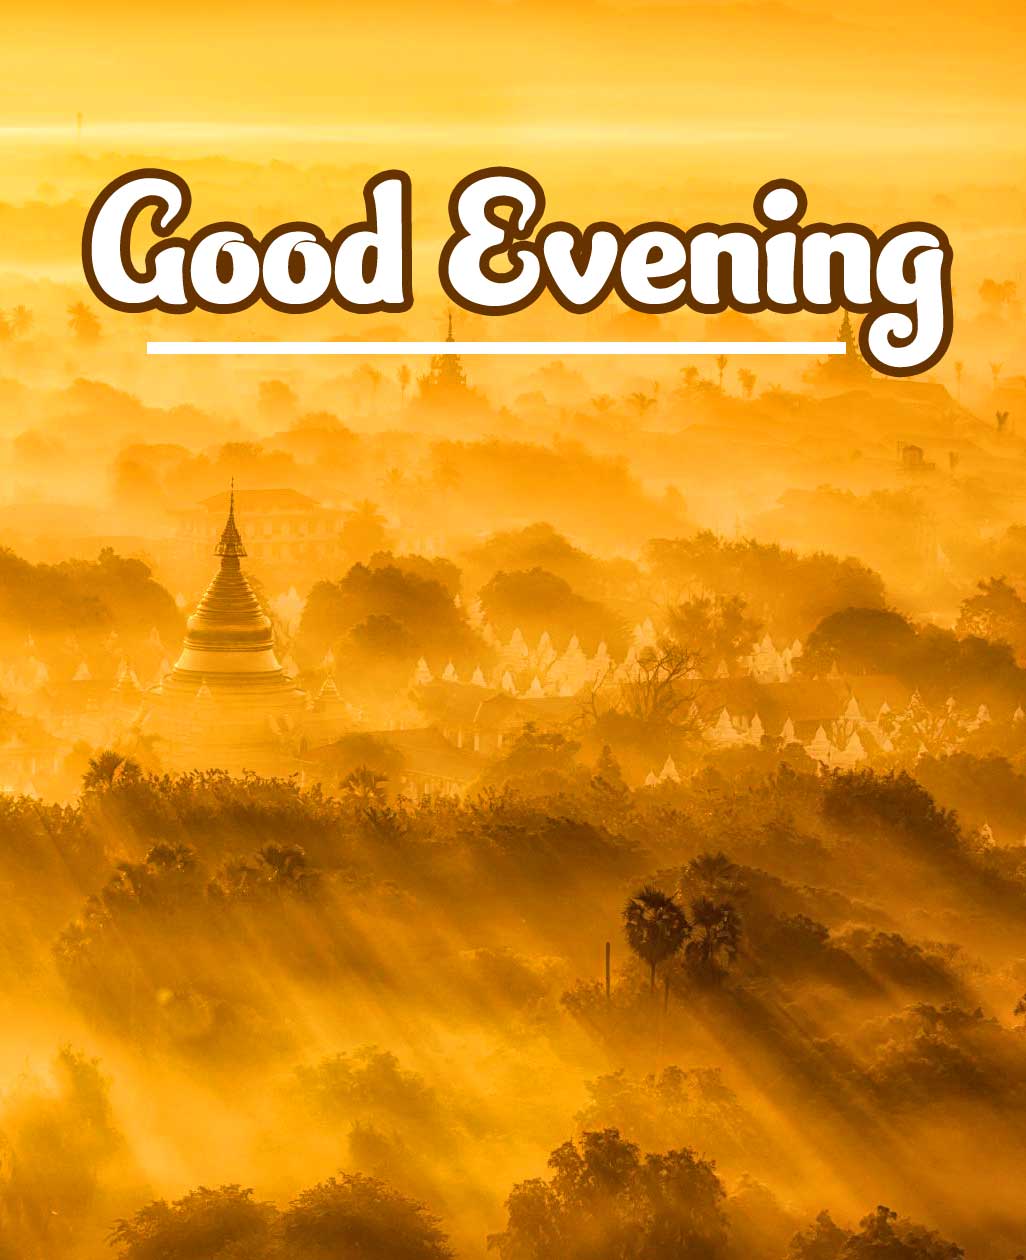 Good Evening Wishes Images Wallpaper Free Download